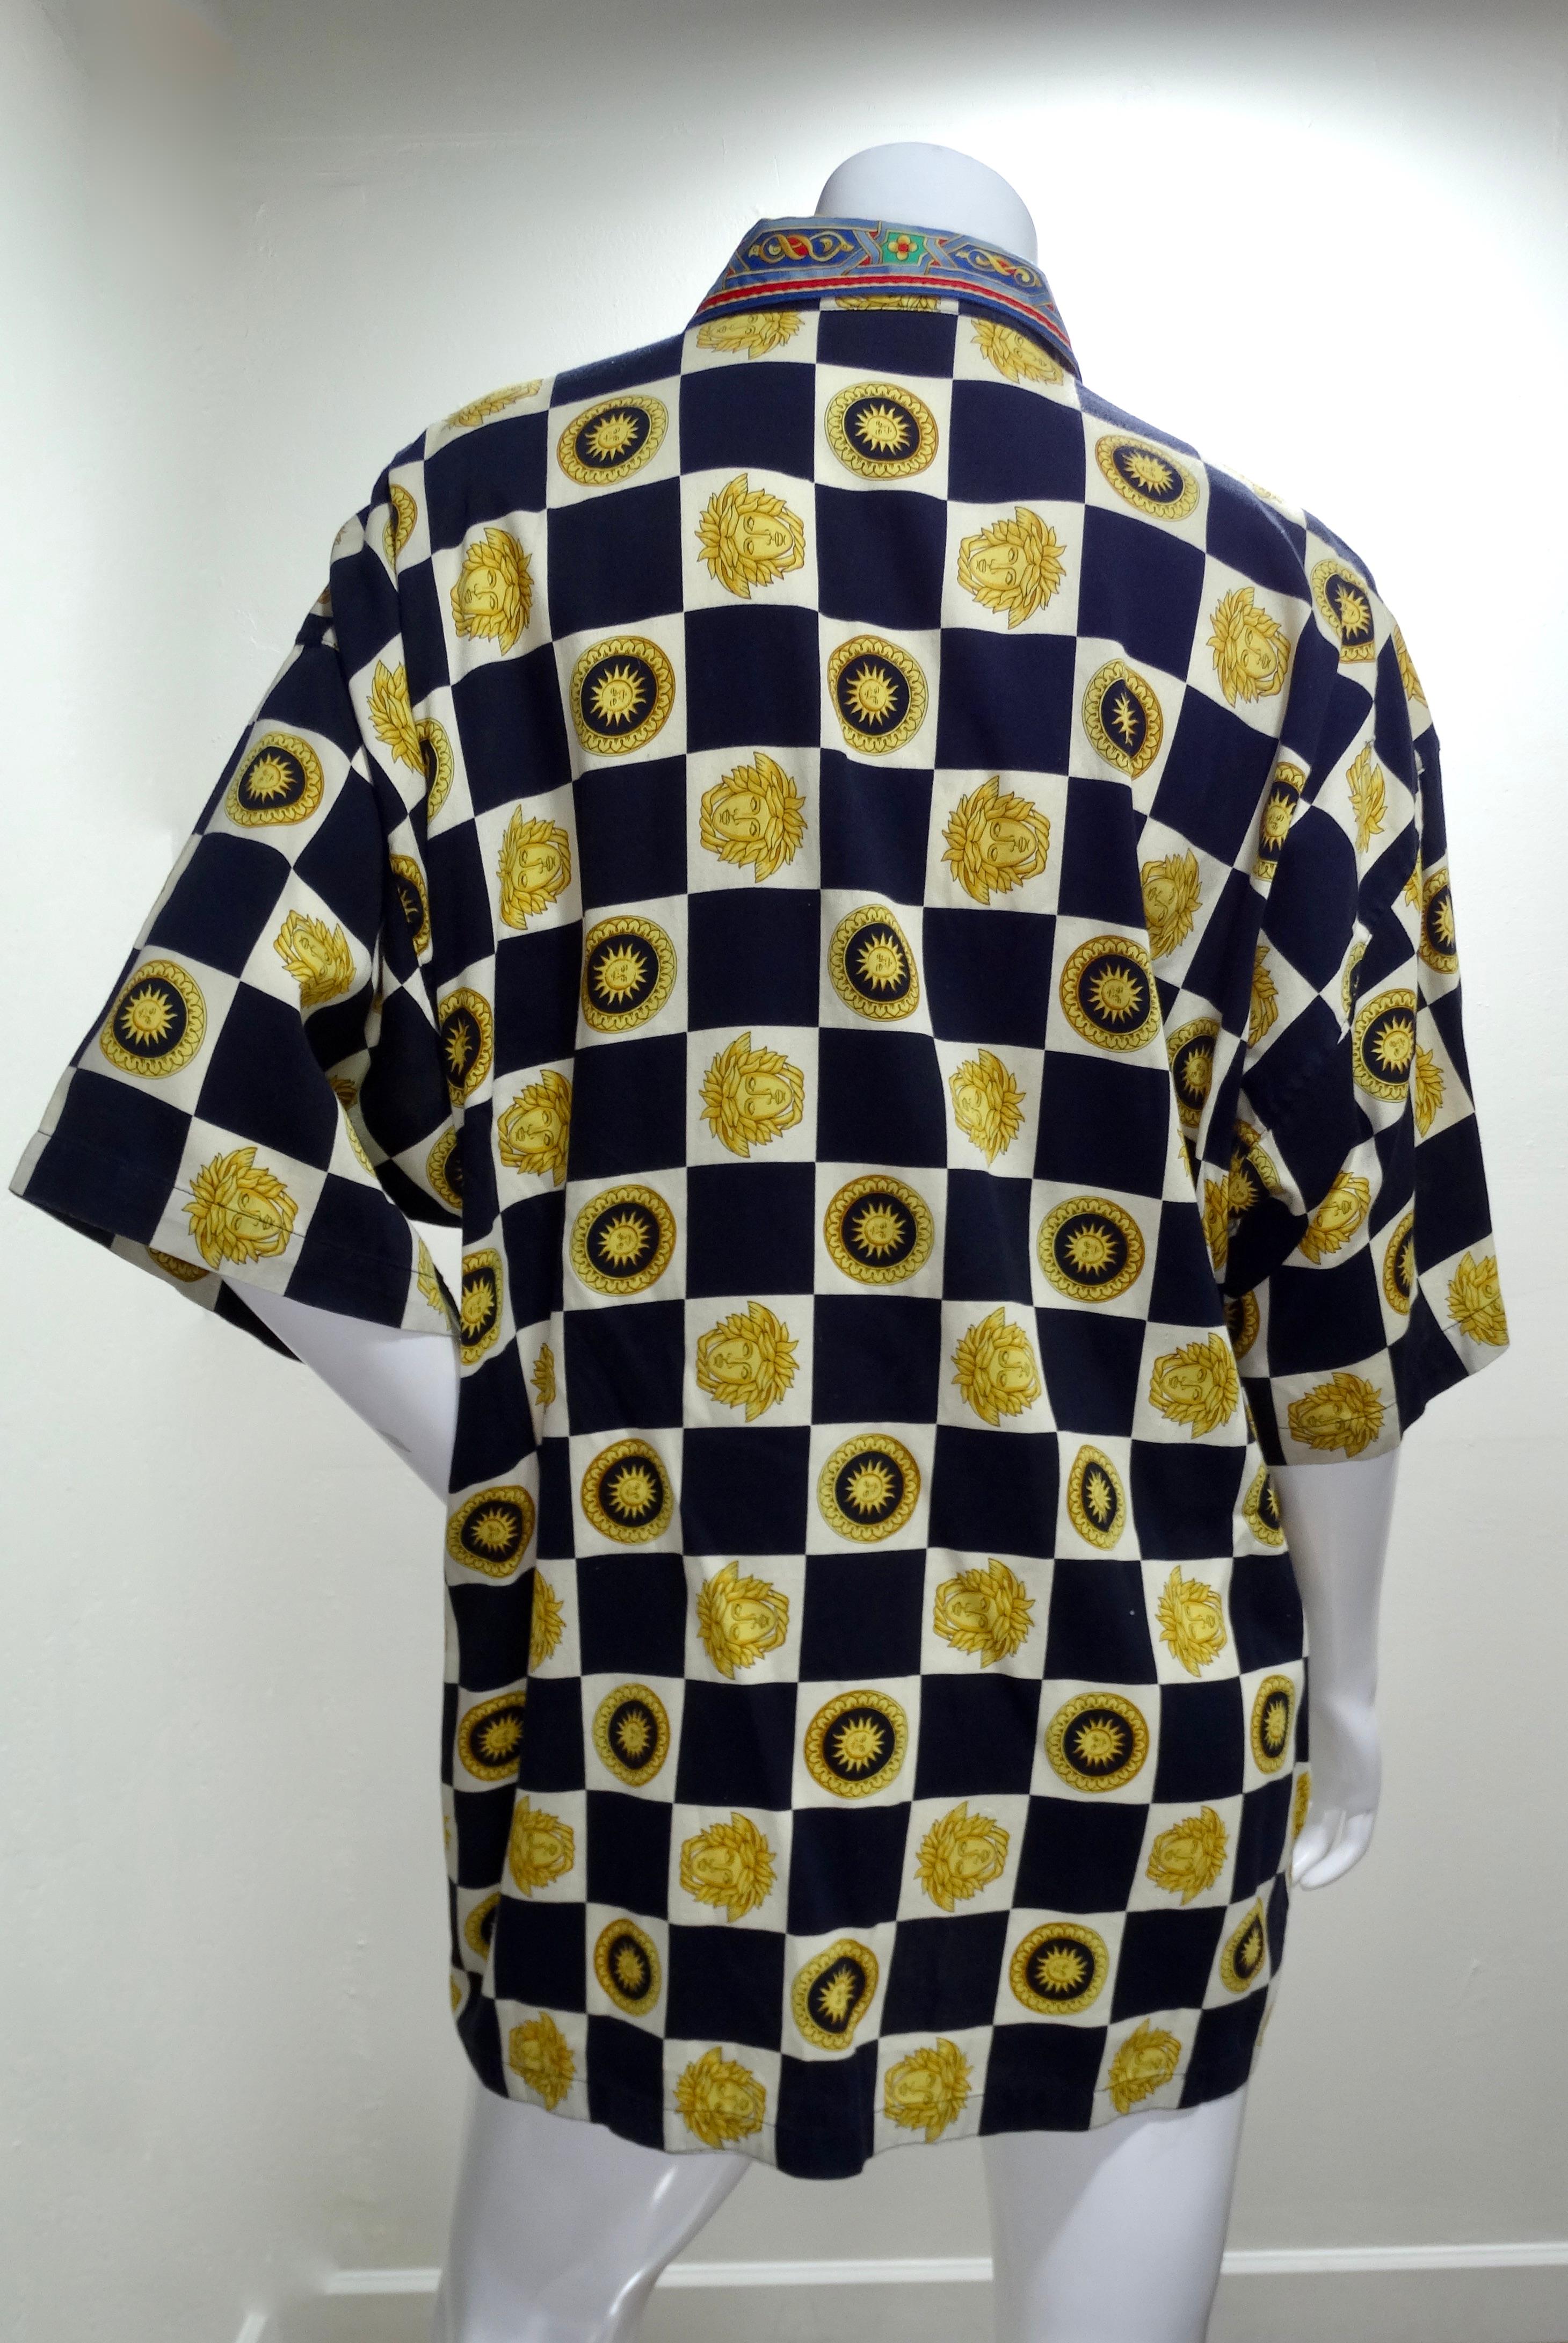 Snag yourself a piece from the Versace archives! Circa 1990s, this cotton shirt features a black and white checkered motif with the Medusa head, celestial suns and a stain glass design down the button up front and on the collar. Classic and